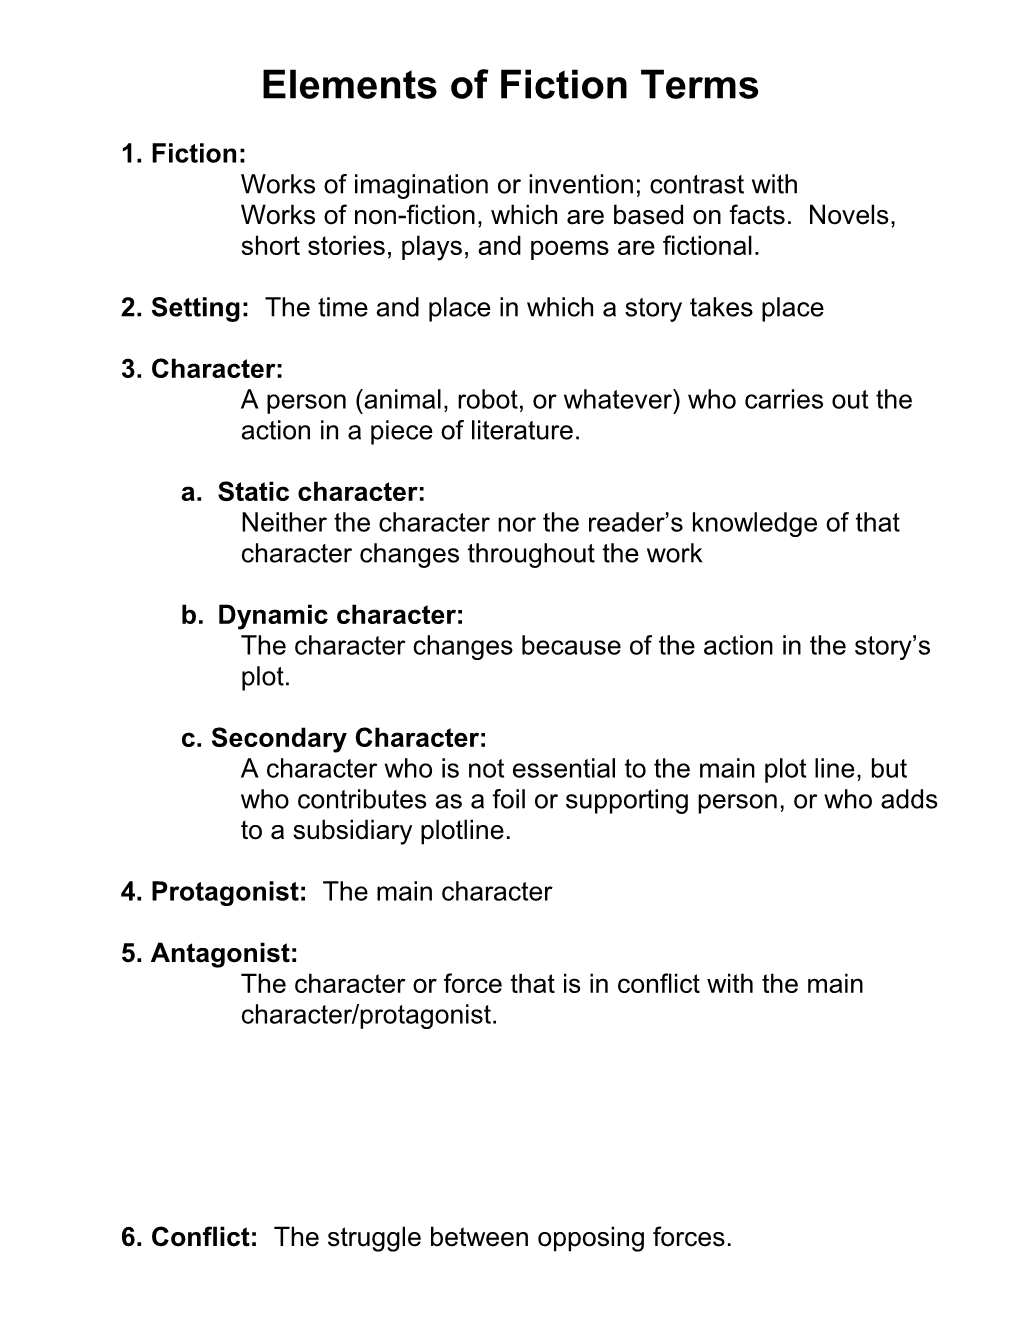 Elements of Fiction Terms